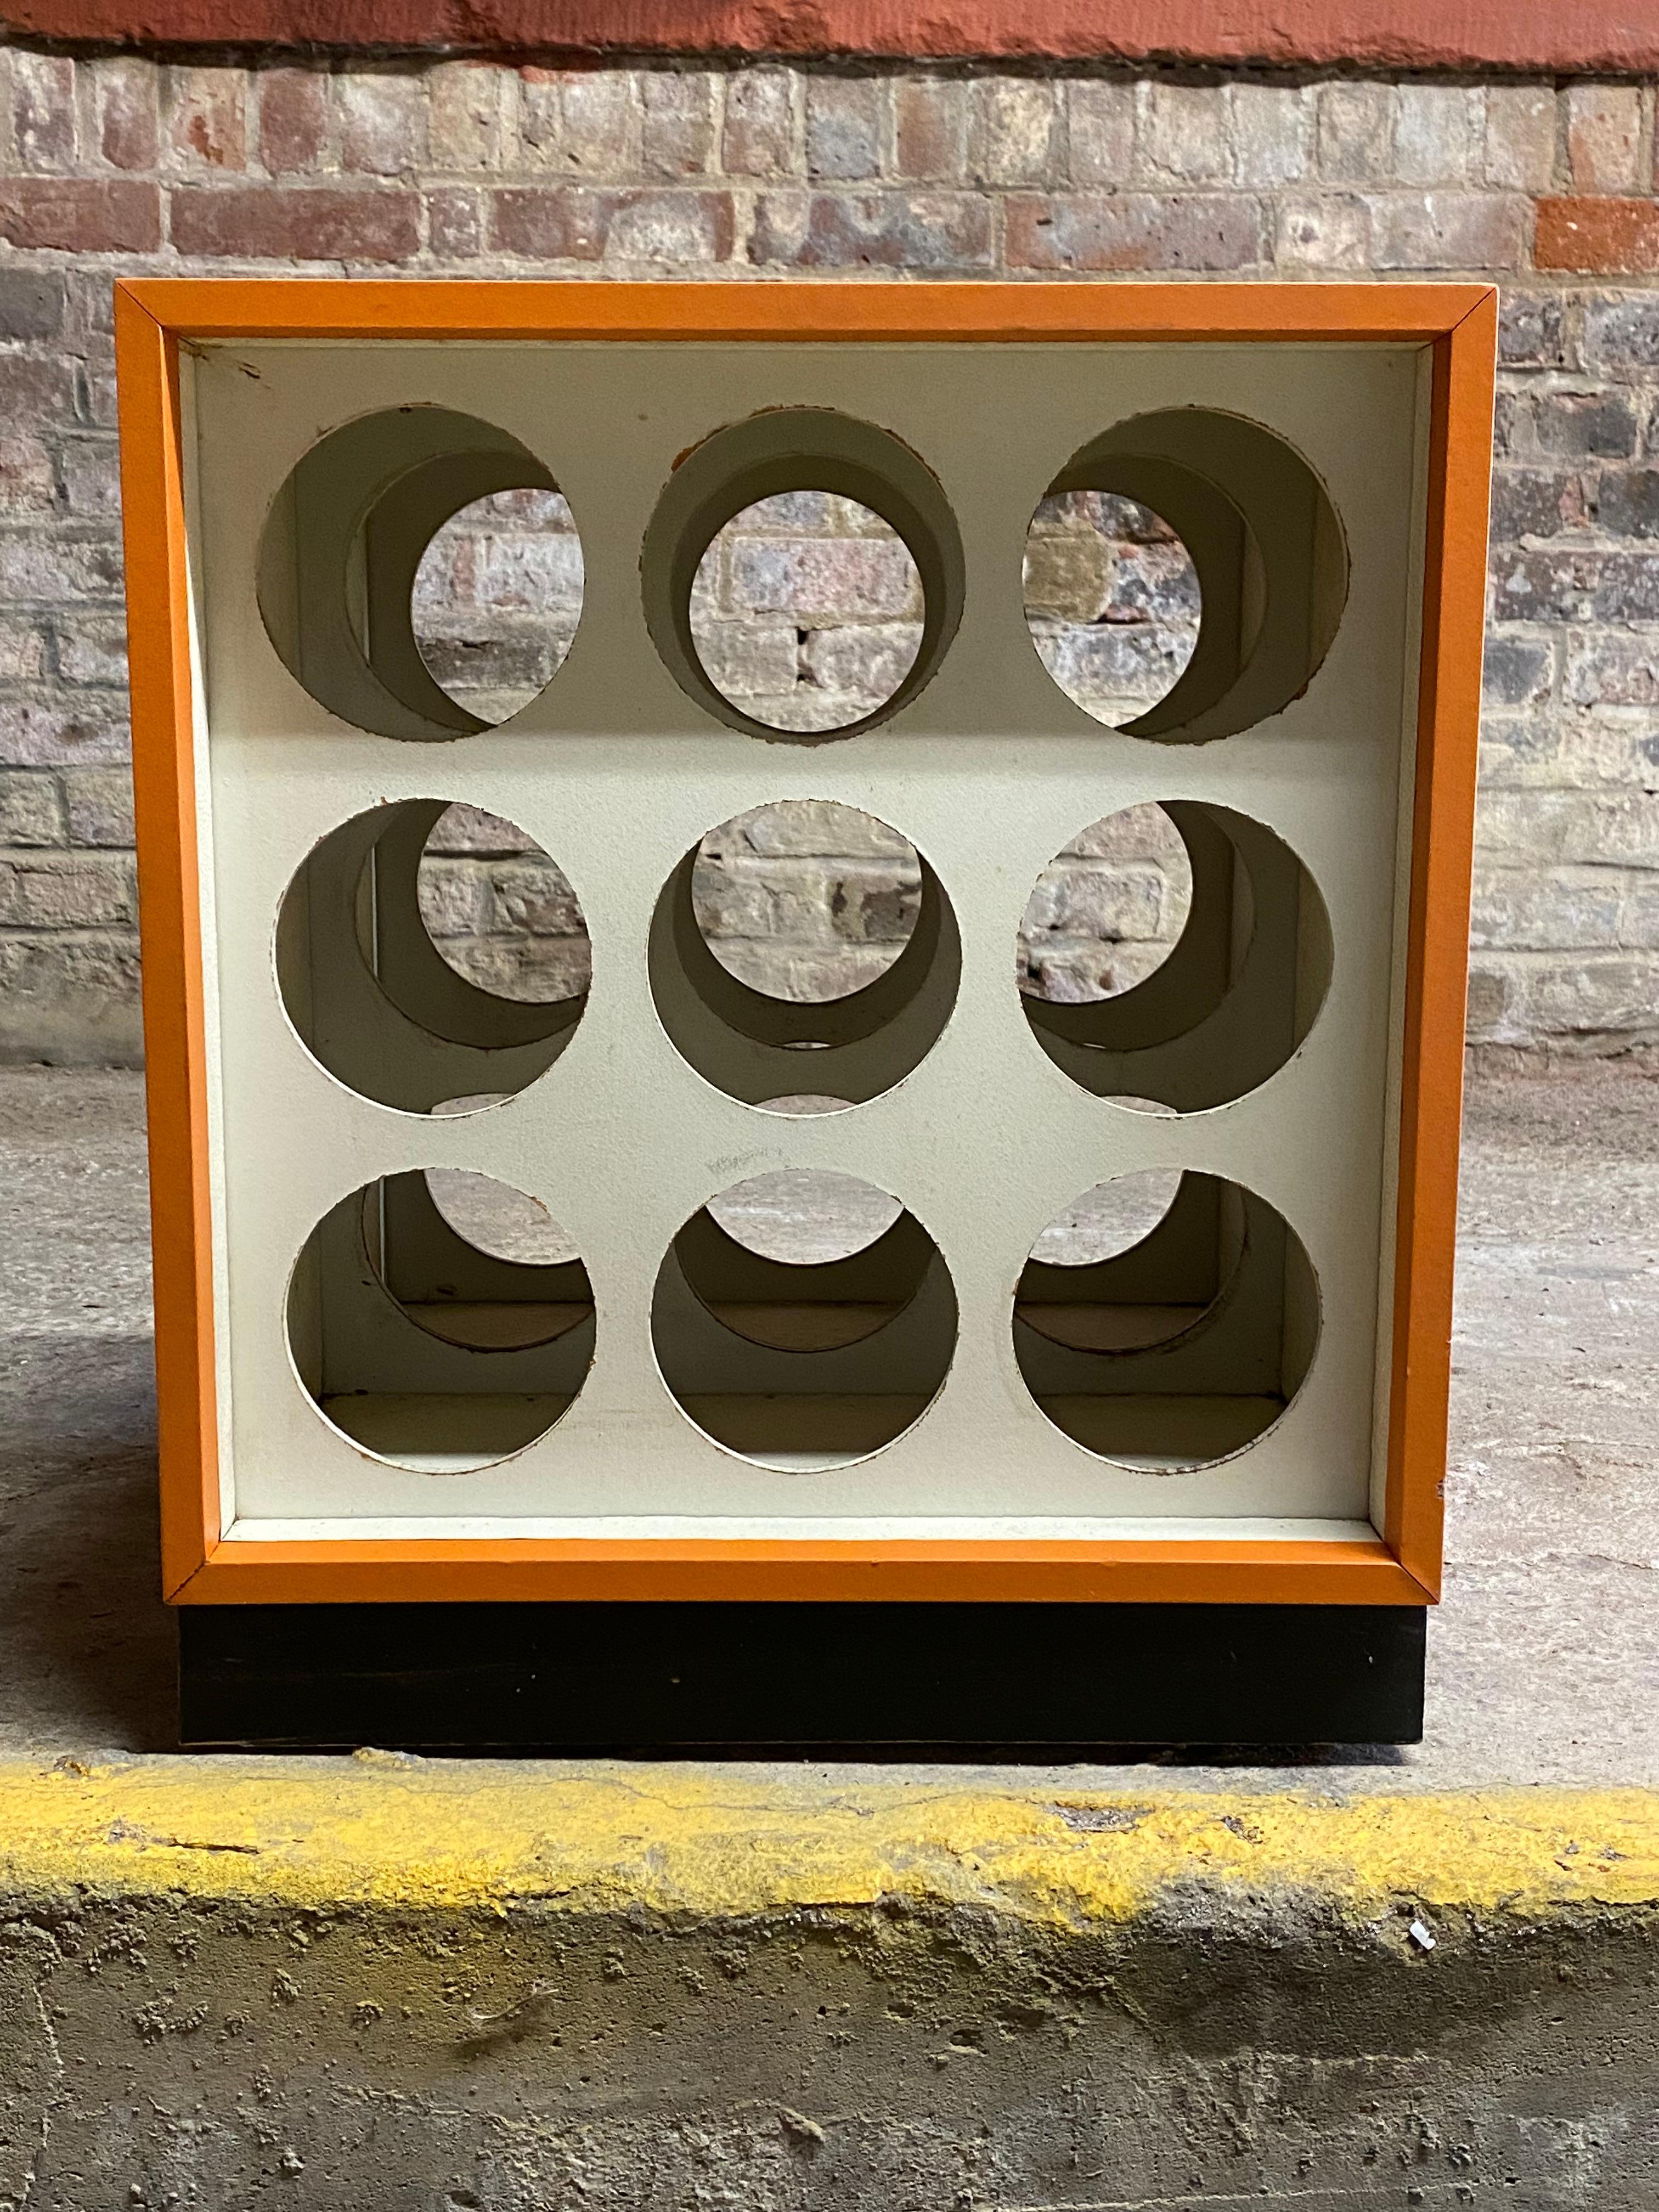 A fun color pop wine rack/side table. Orange vinyl clad cube with an 18 hole masonite inserts on two sides. Black base. Good overall condition with some minor nicks to the vinyl. Minor scuffs and light scratches. Structurally sound and sturdy. Some